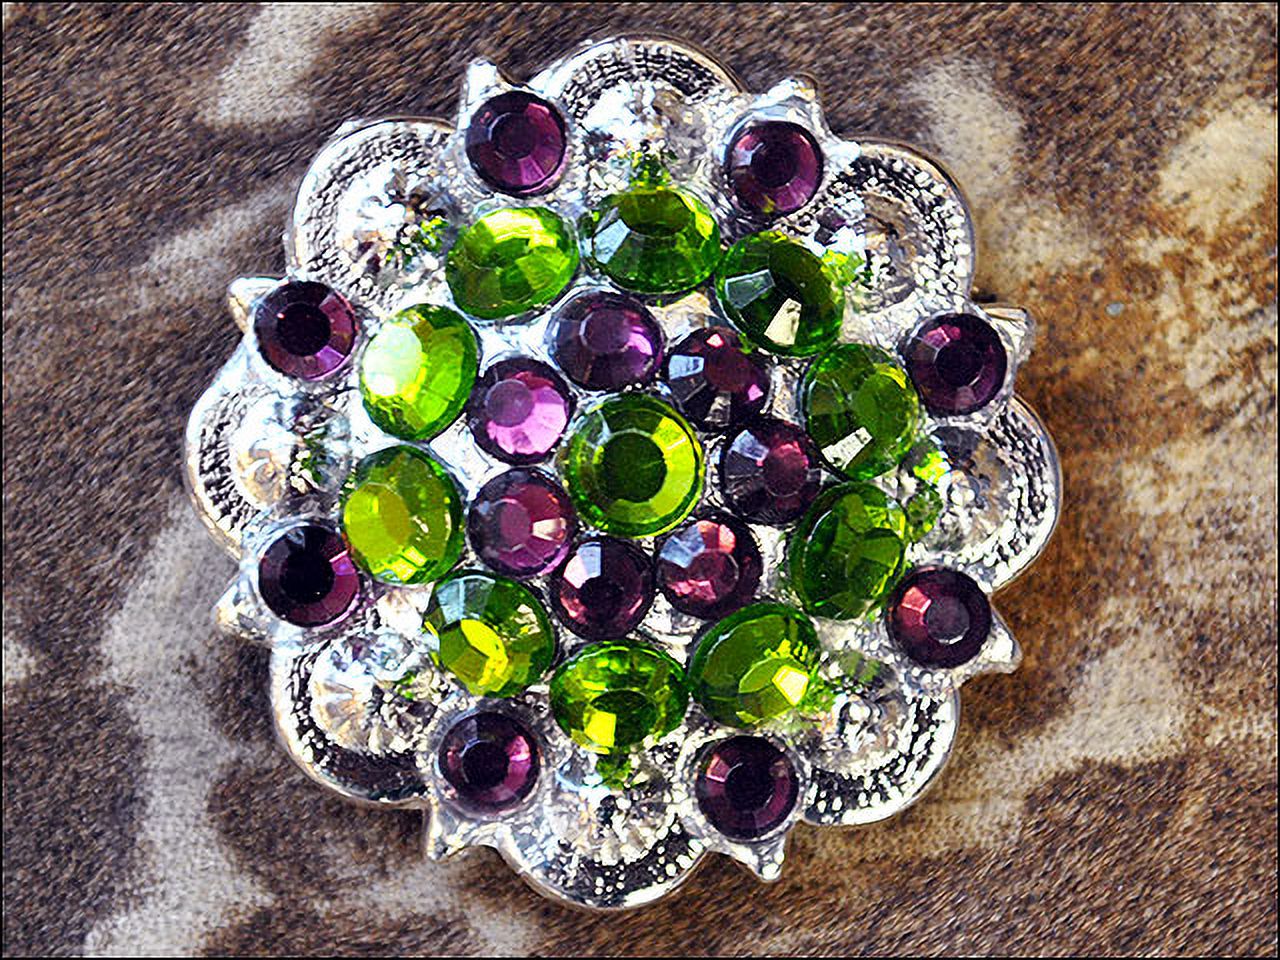 94HS Set Of 32 Screw Back Concho Peridot Amethyst Crystal 1-1/4In Saddle - image 2 of 7